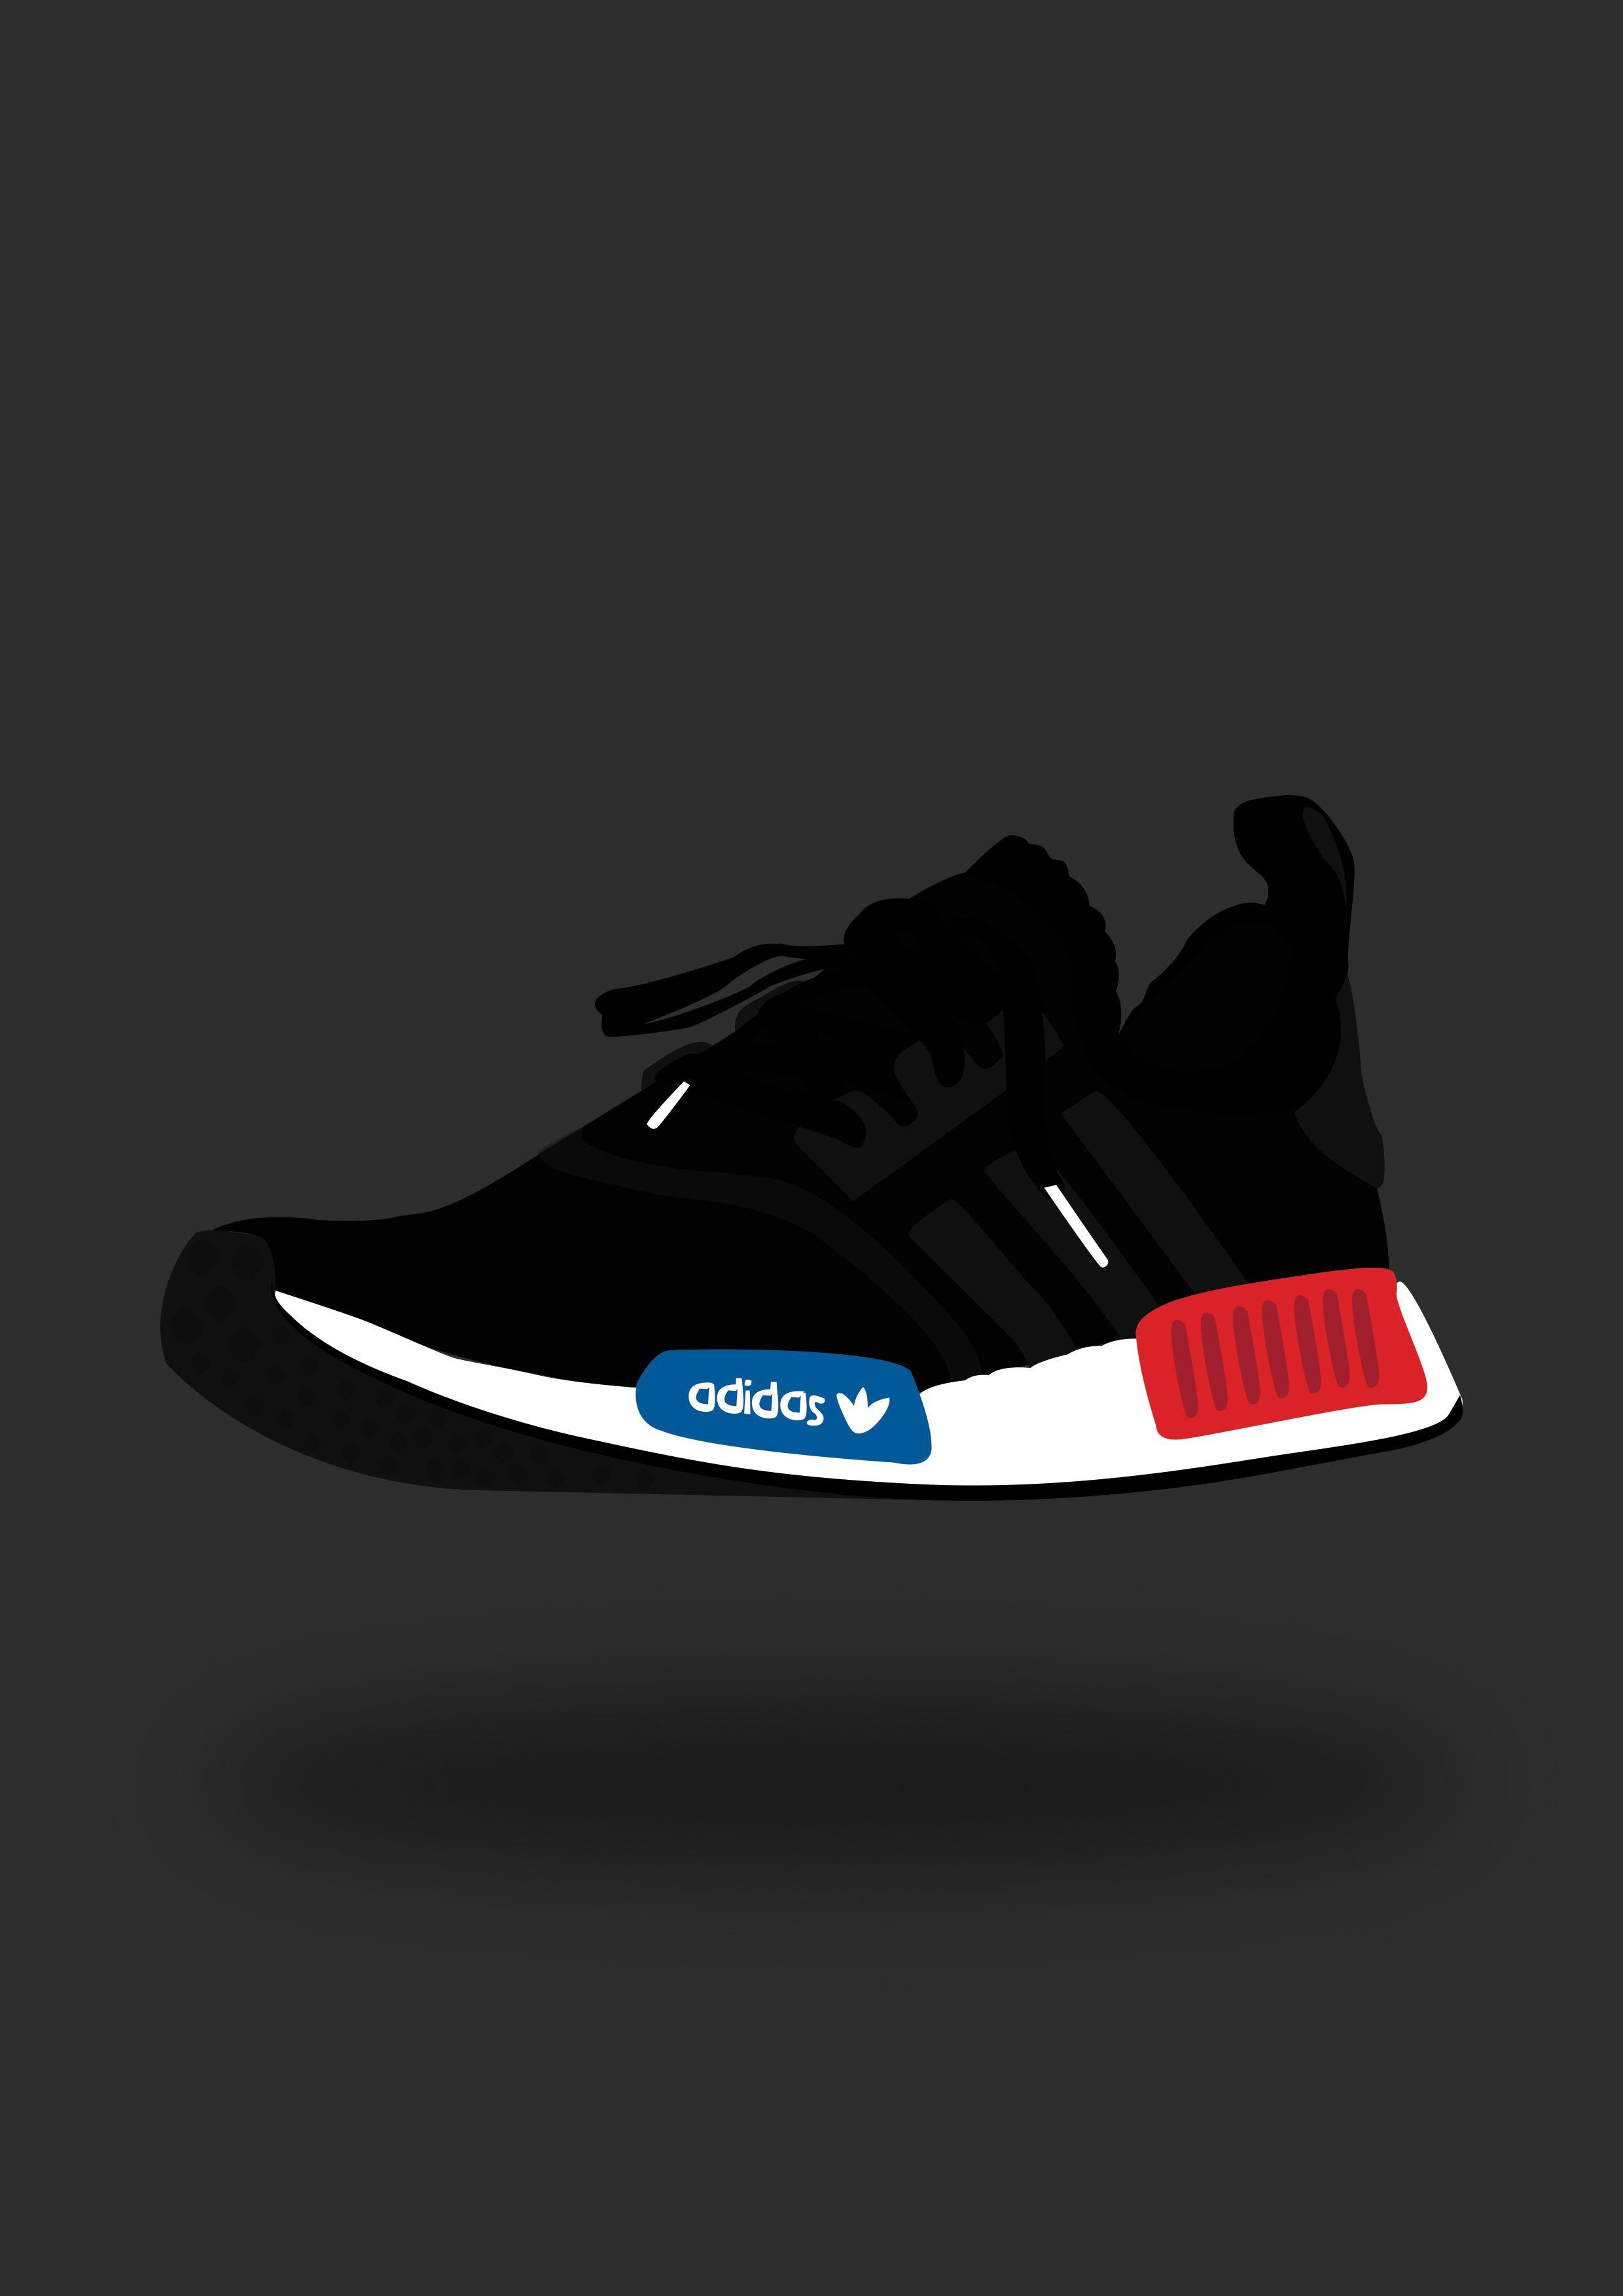 Adidas NMD Wallpapers - Wallpaper Cave